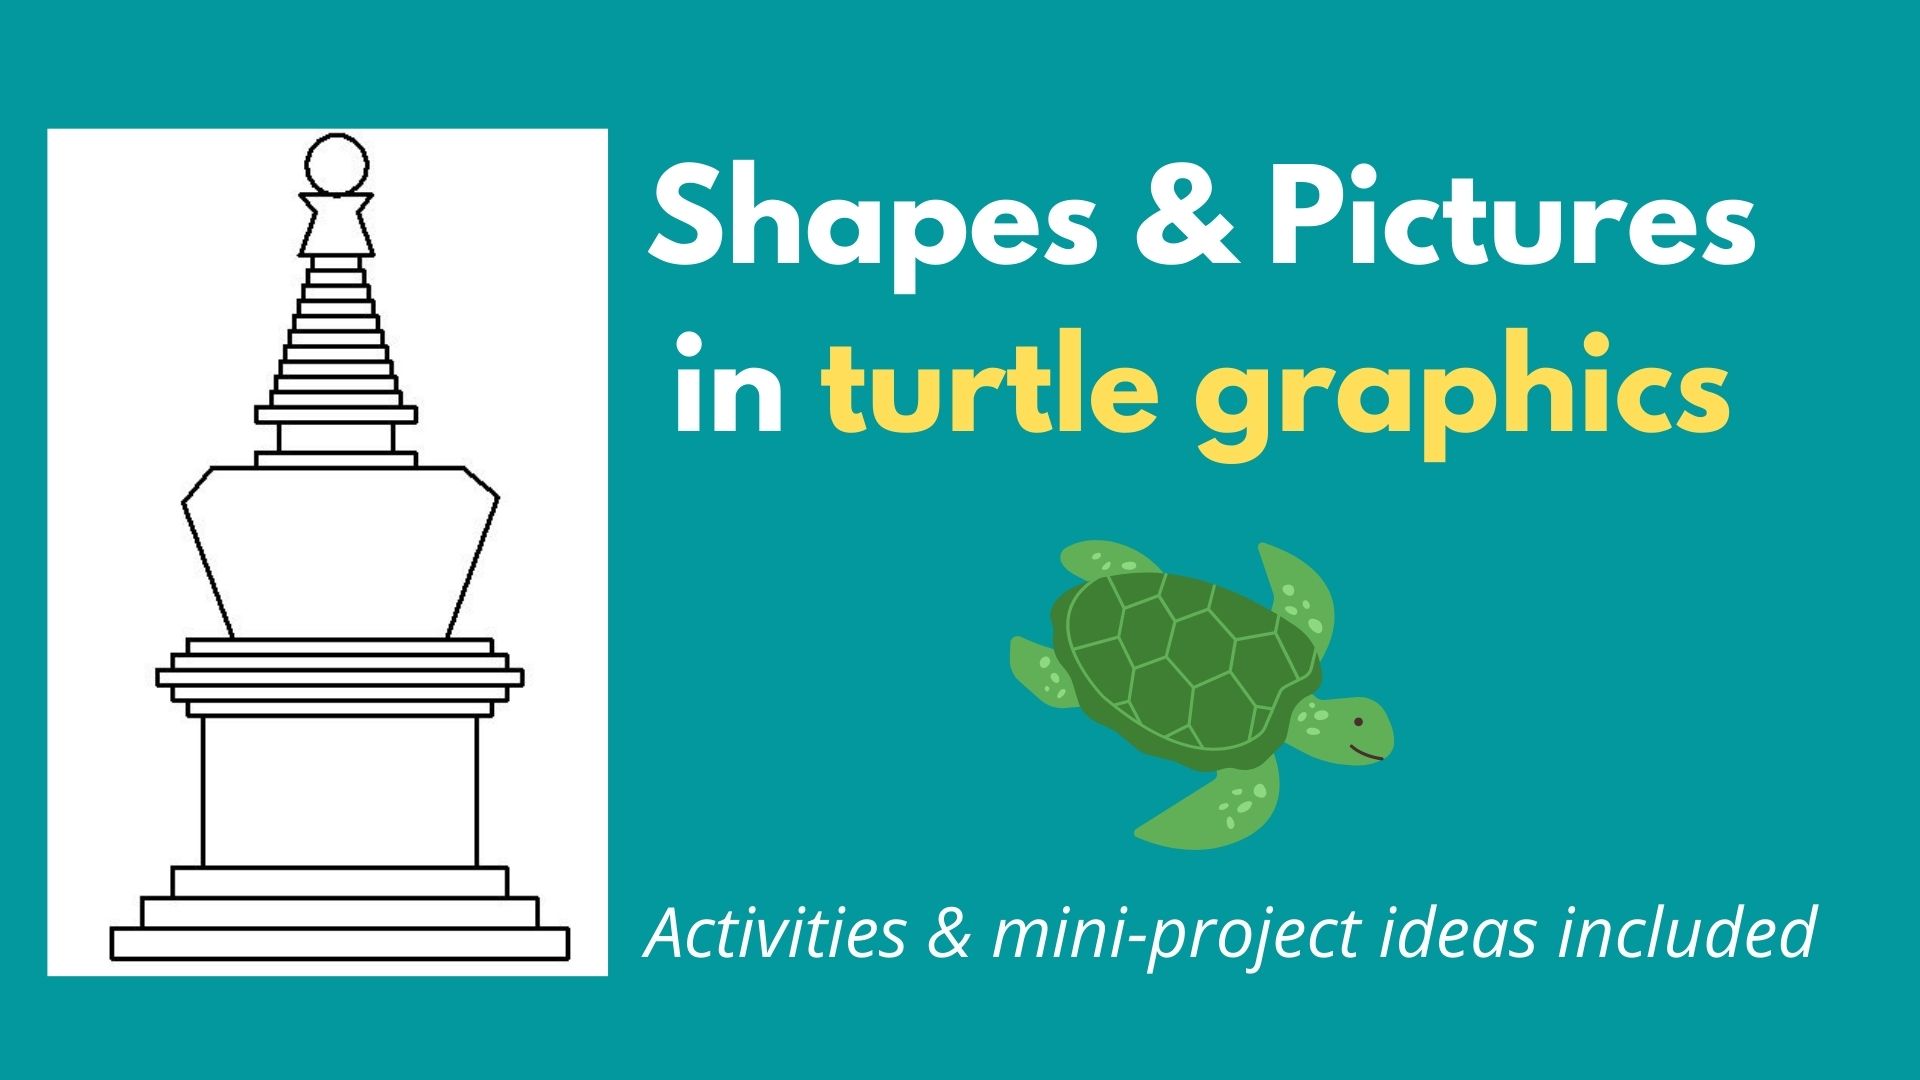 Shapes & Pictures in turtle graphics